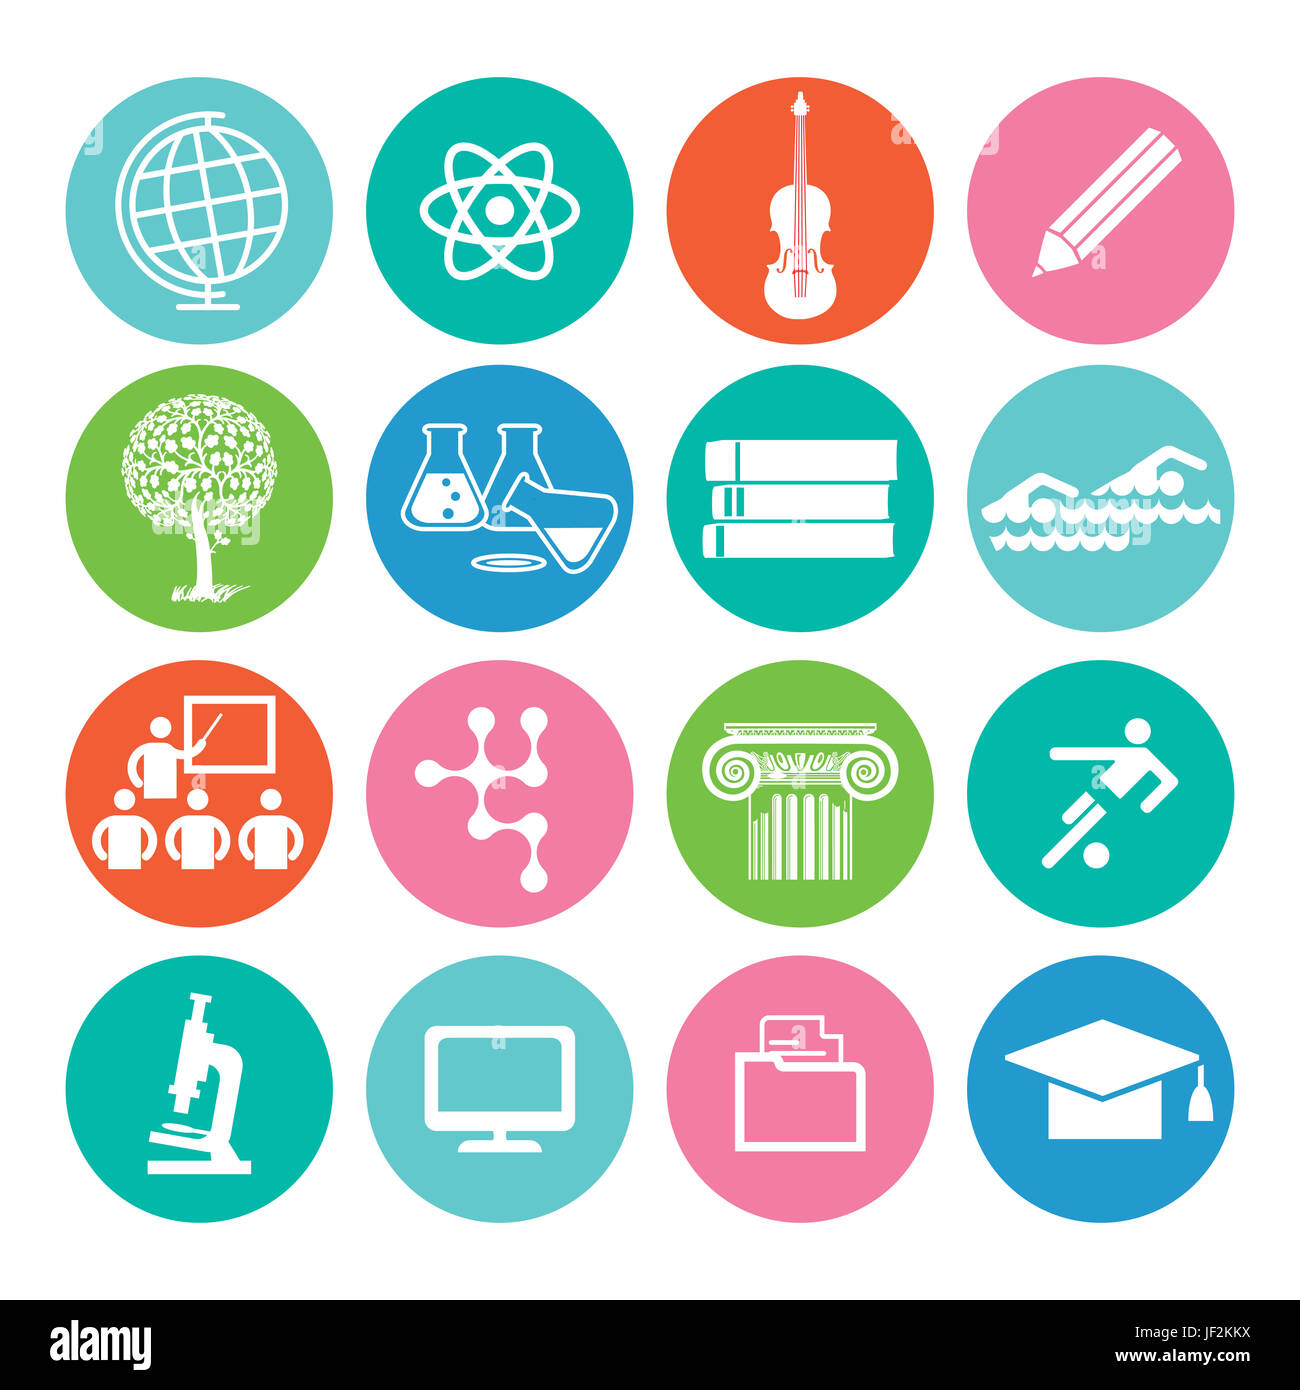 Education and study icon Stock Photo